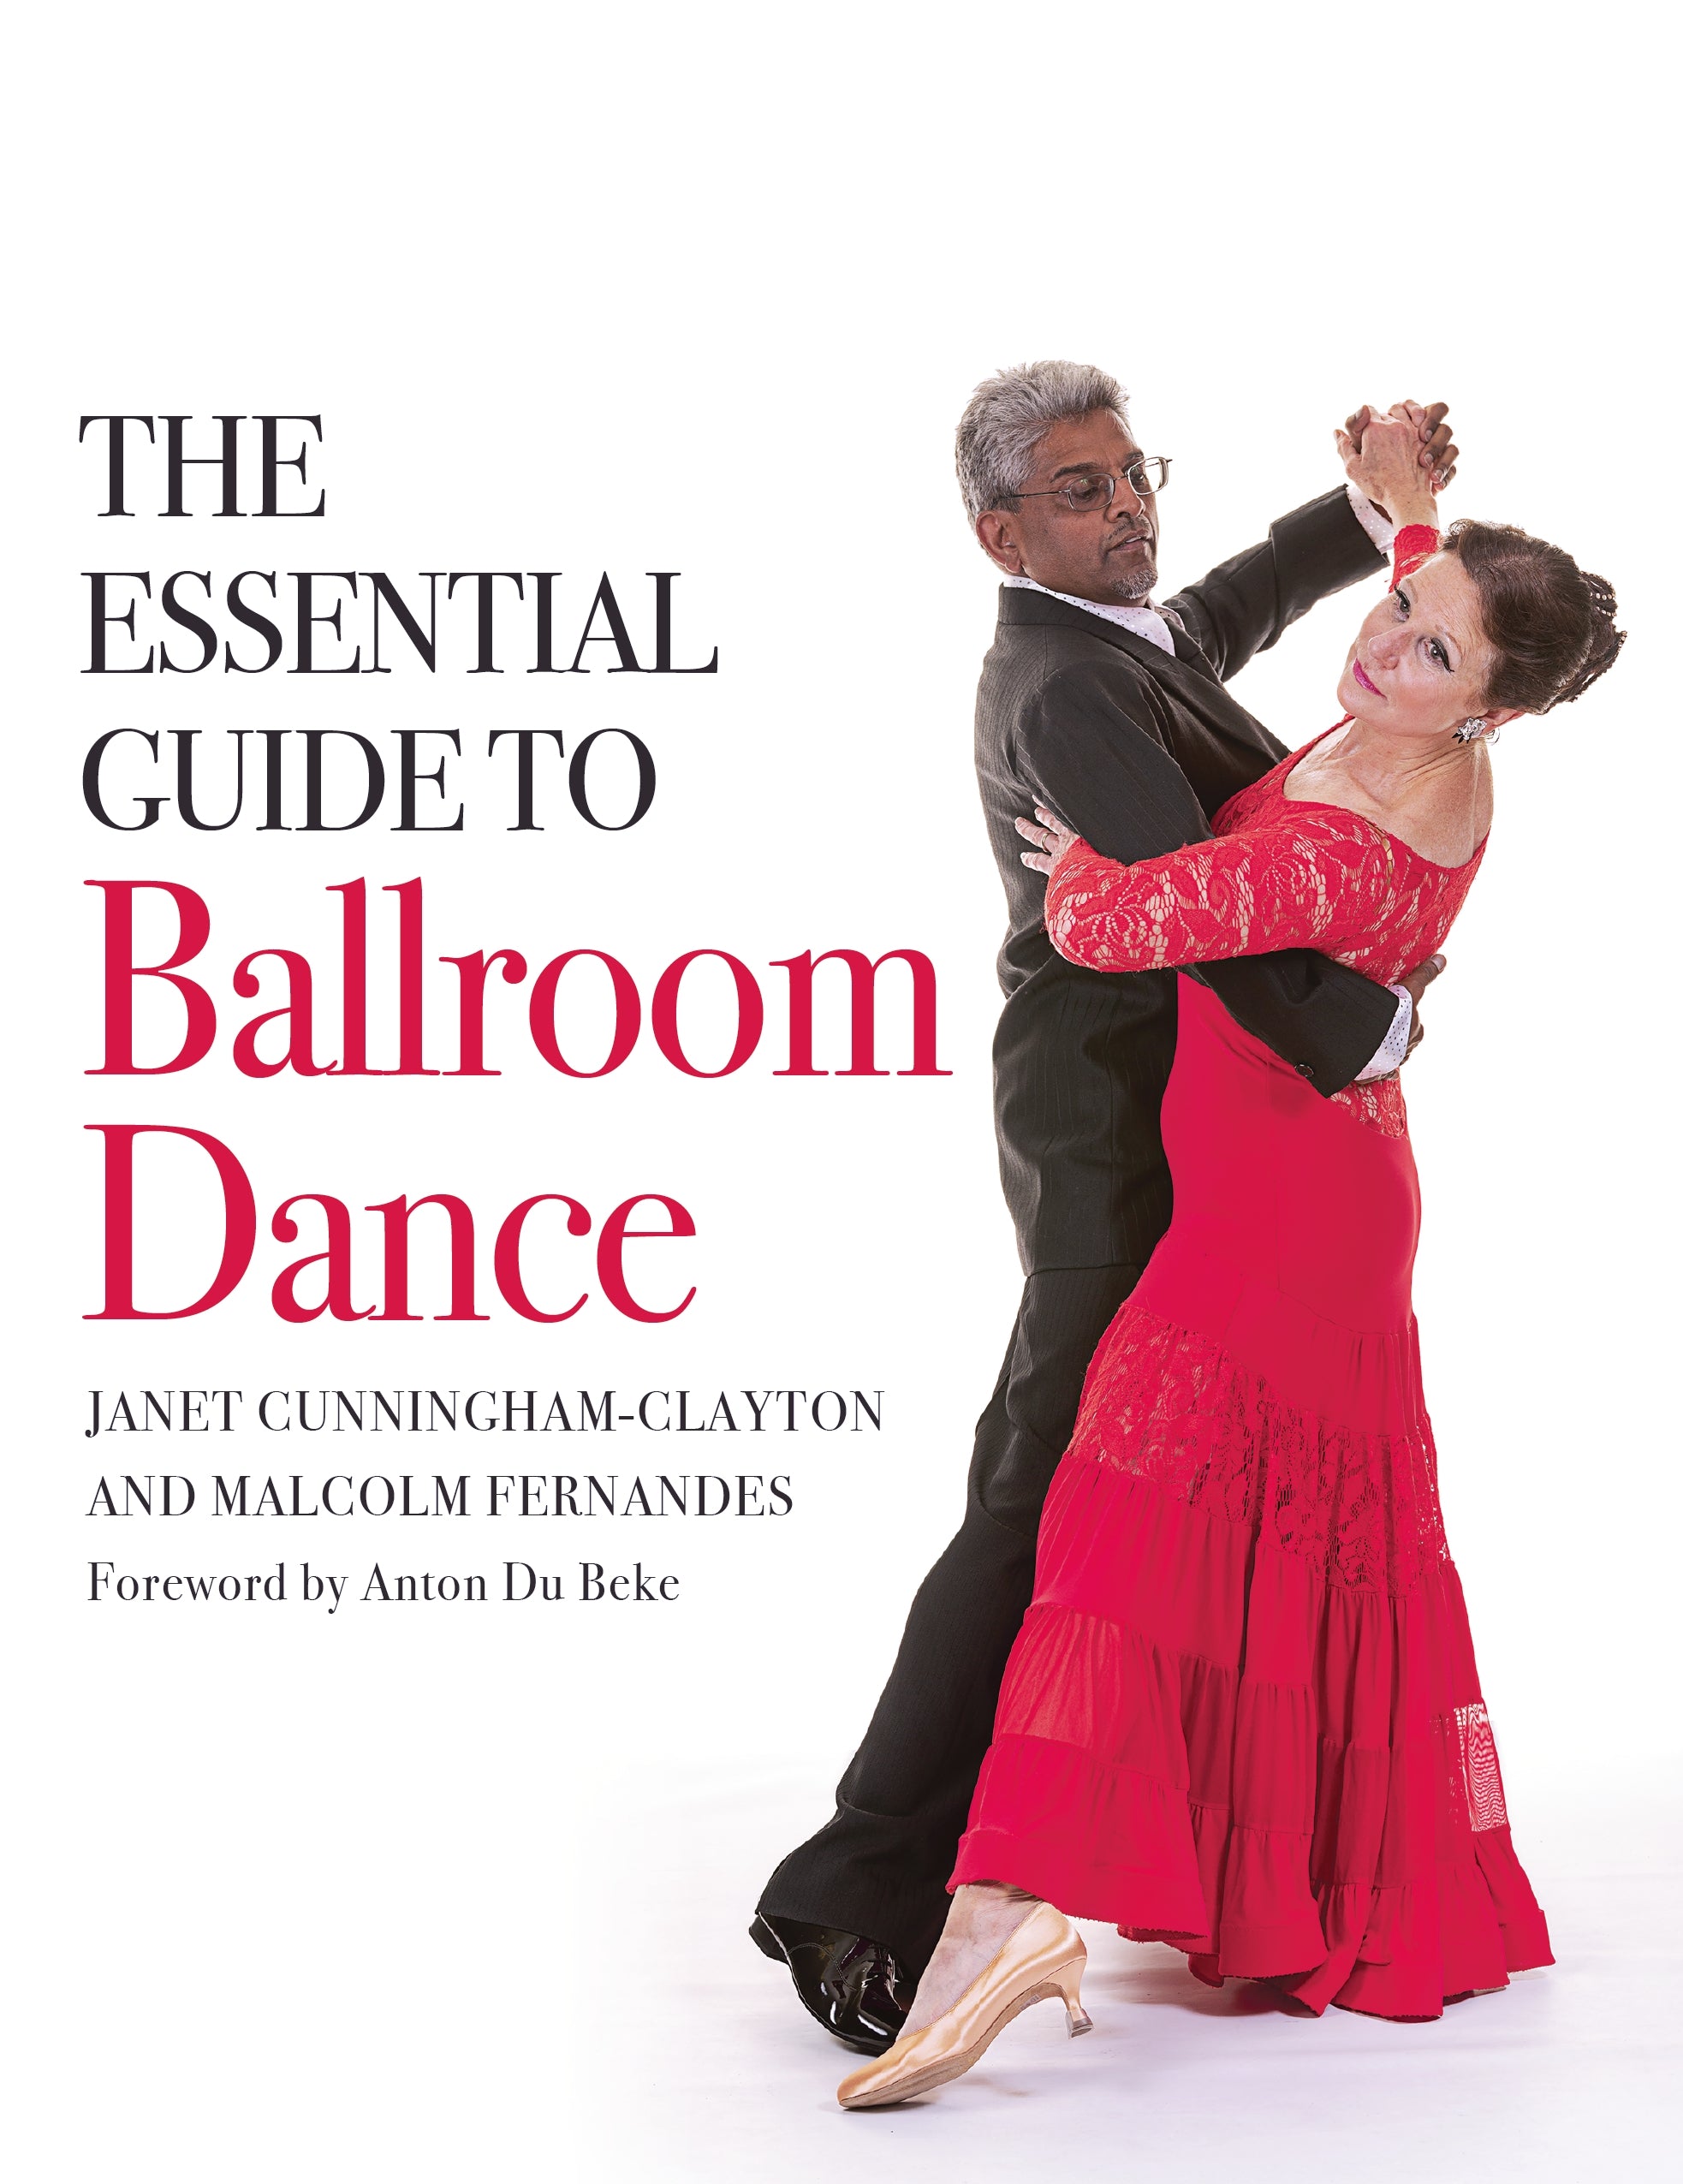 The Essential Guide to Ballroom Dance